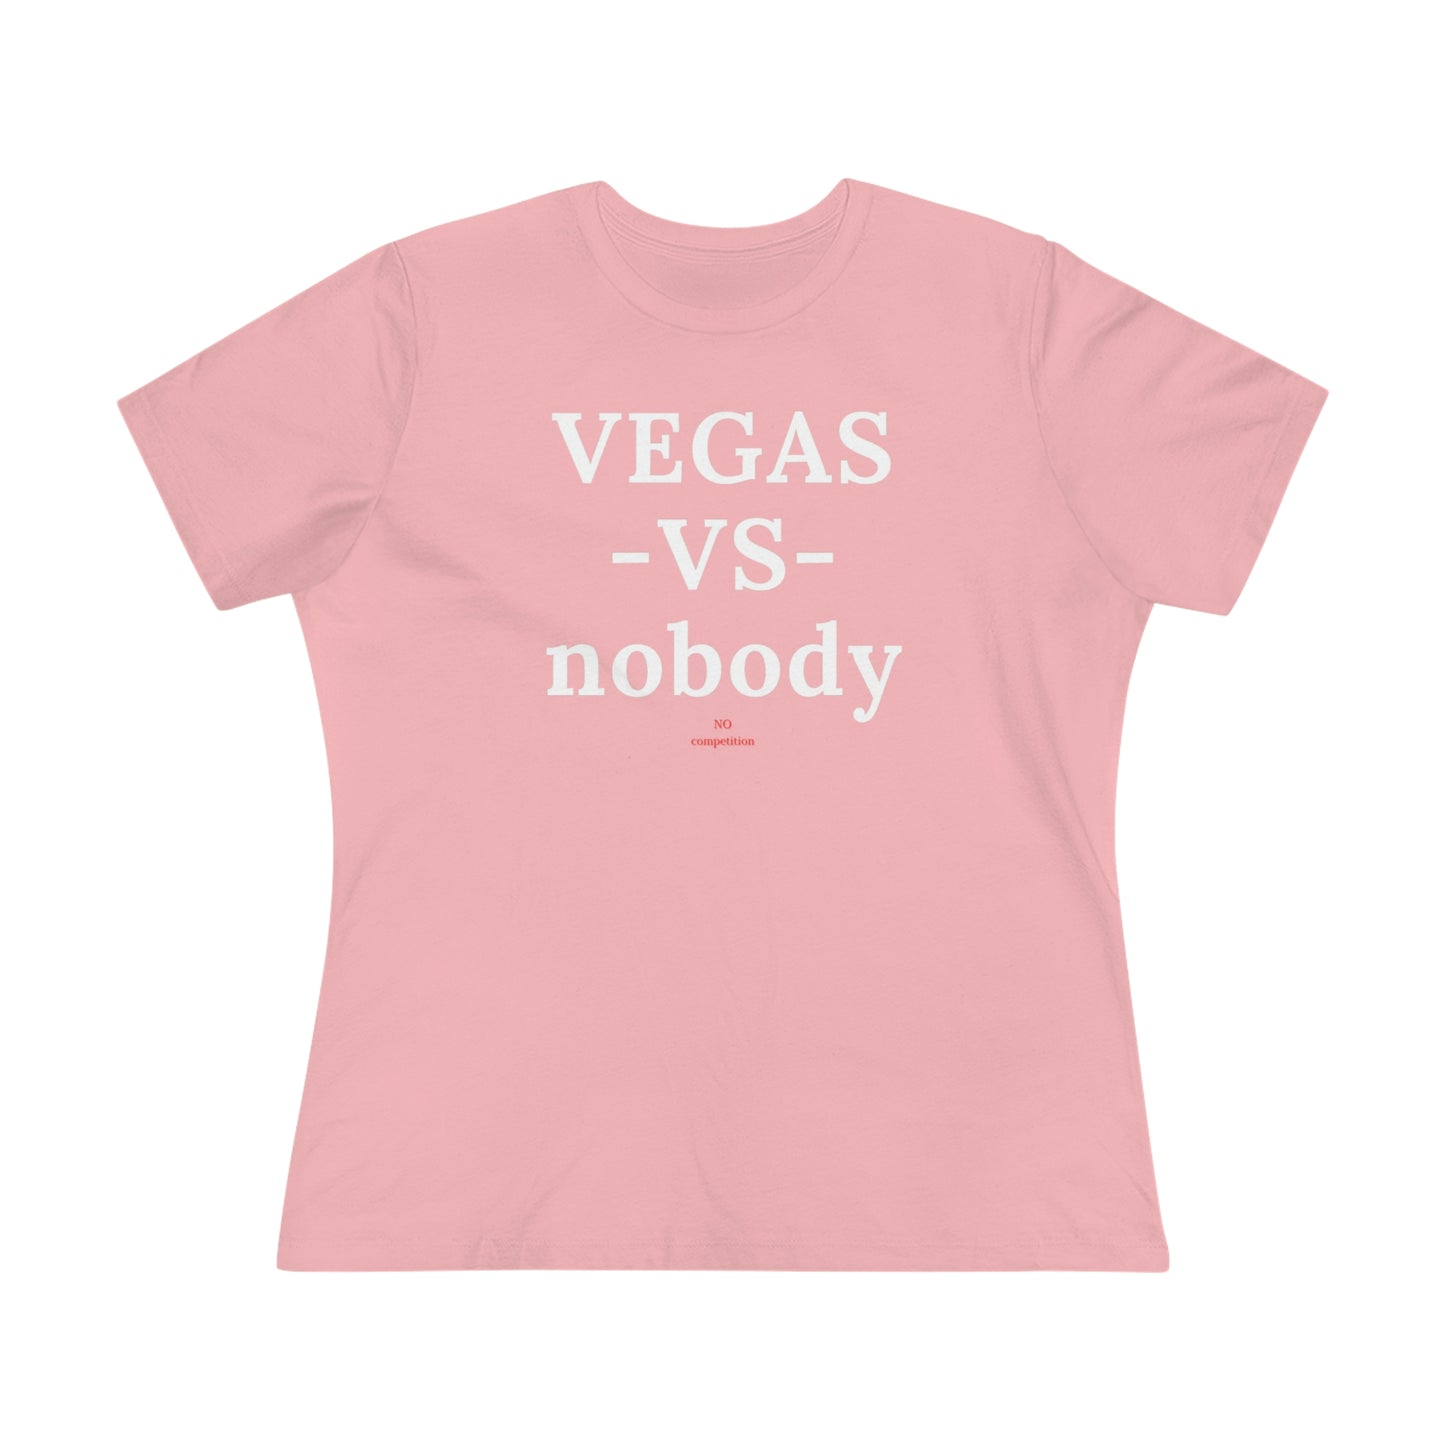 No Competition Showtie Tee (Ladies)